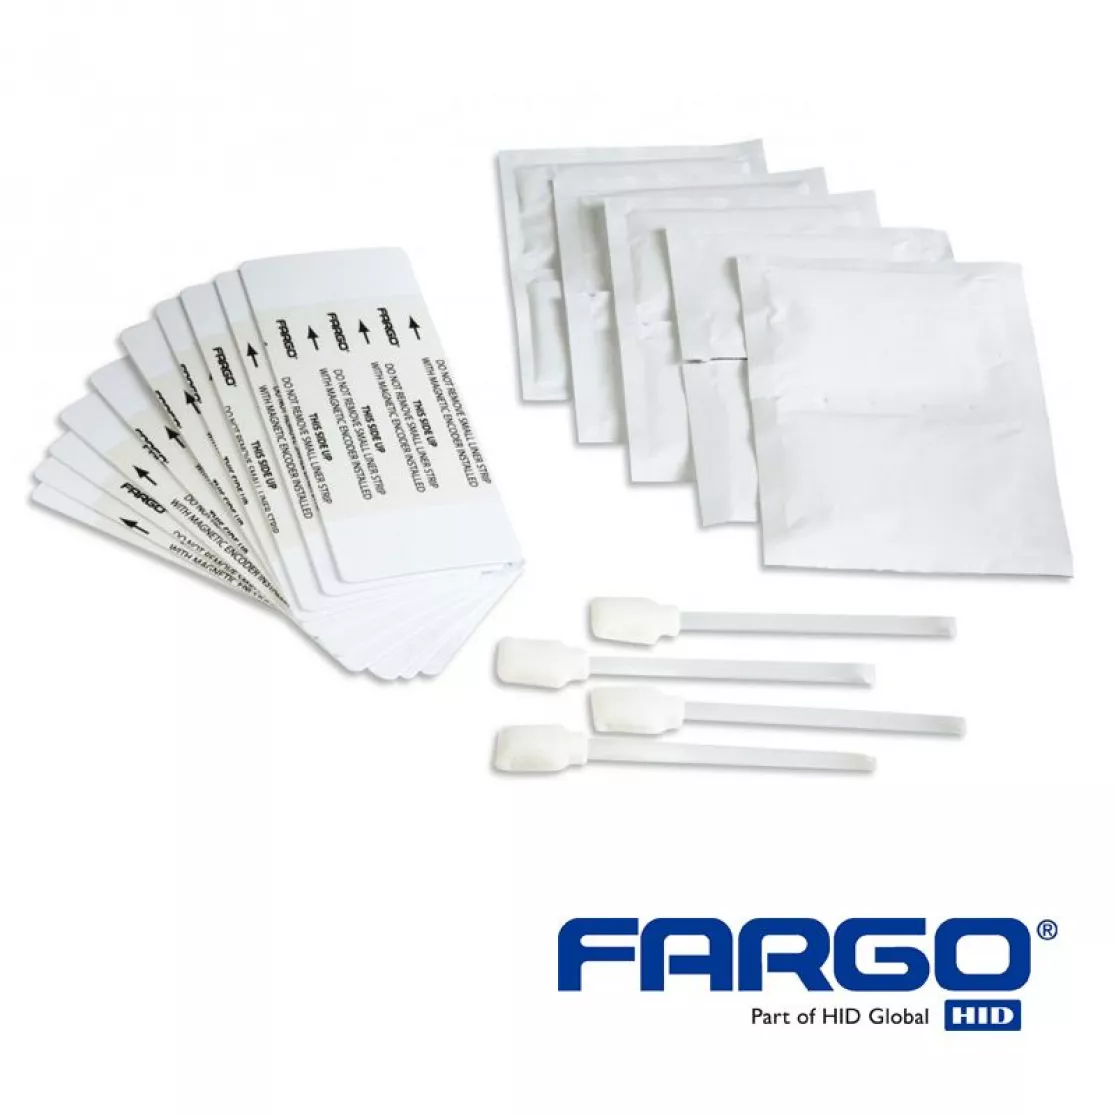 Cleaning kit for hid fargo hdp6600 card printer